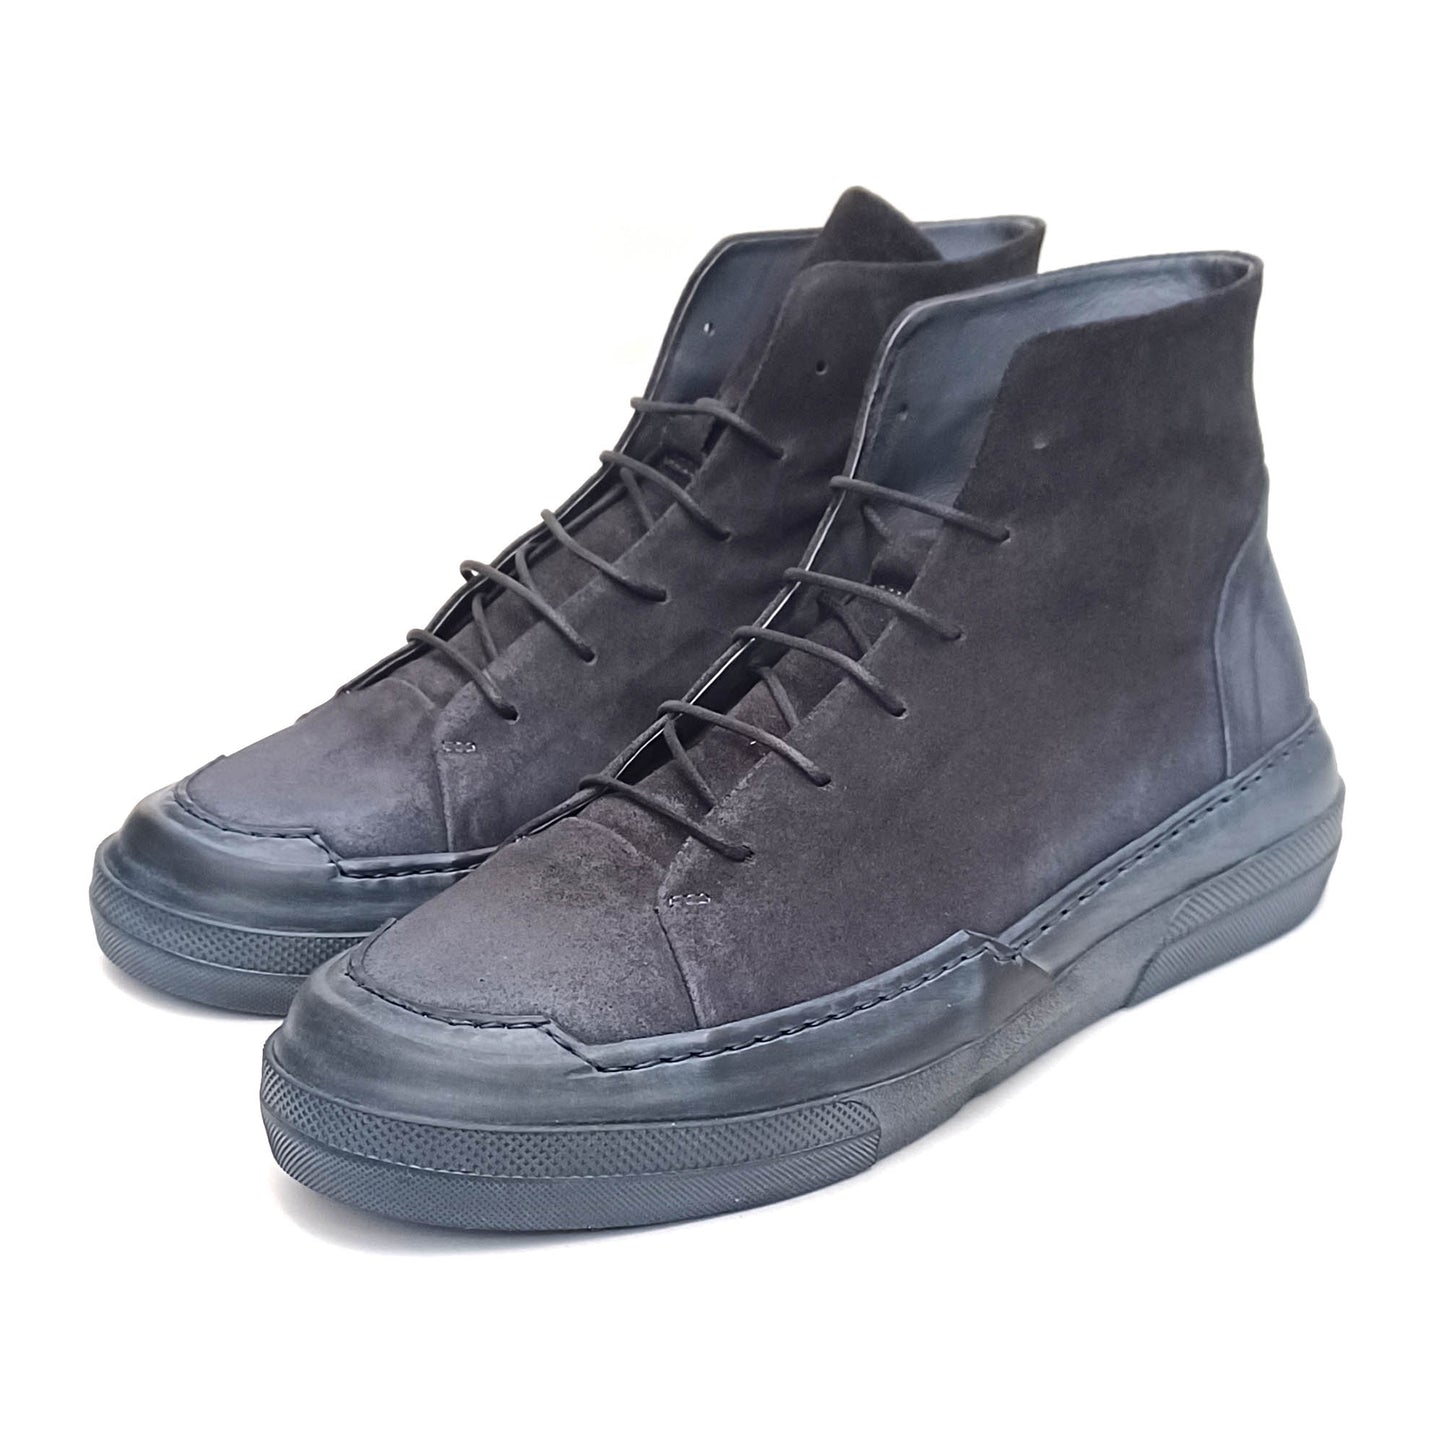 Lofina Charcoal Suede Ankle Boots- MENS